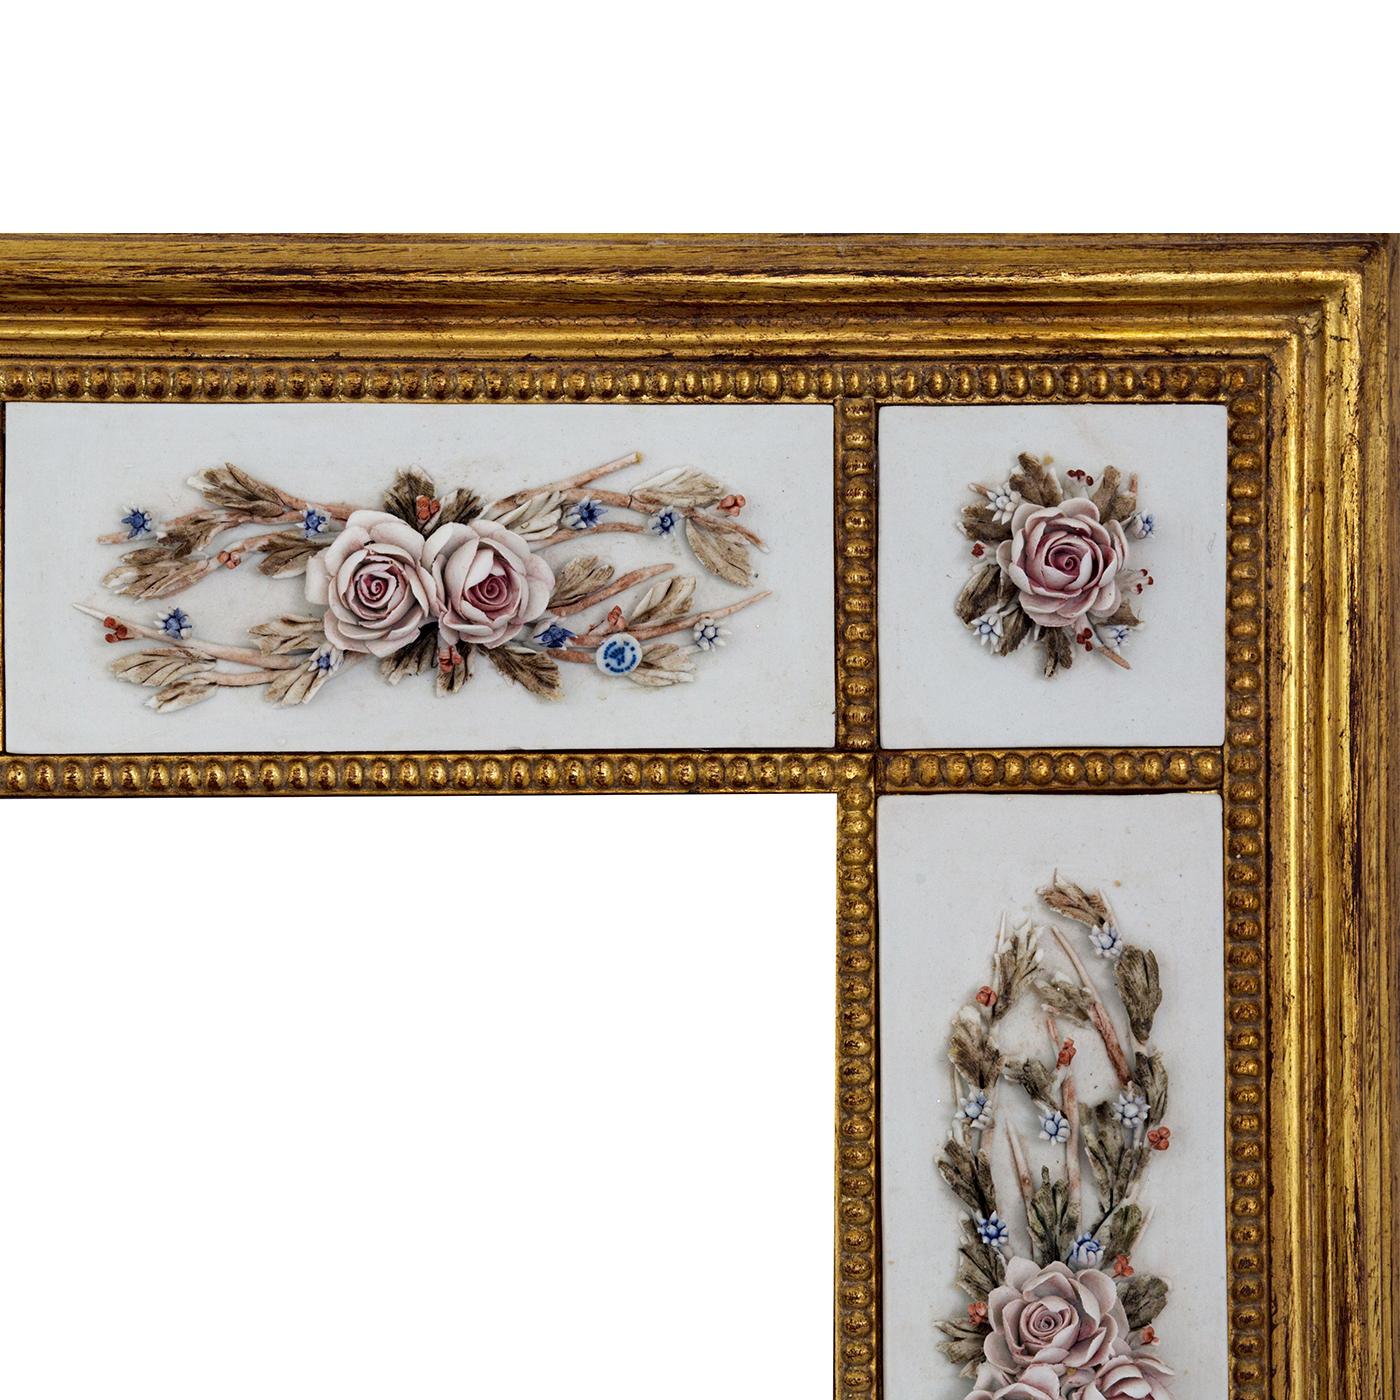 This spectacular mirror is framed with an extraordinary work of art, handmade of wood and splendidly decorated with patinated gold leaf and Capodimonte porcelain applications, painted by hand with gorgeous roses and rose buds cooked on a third